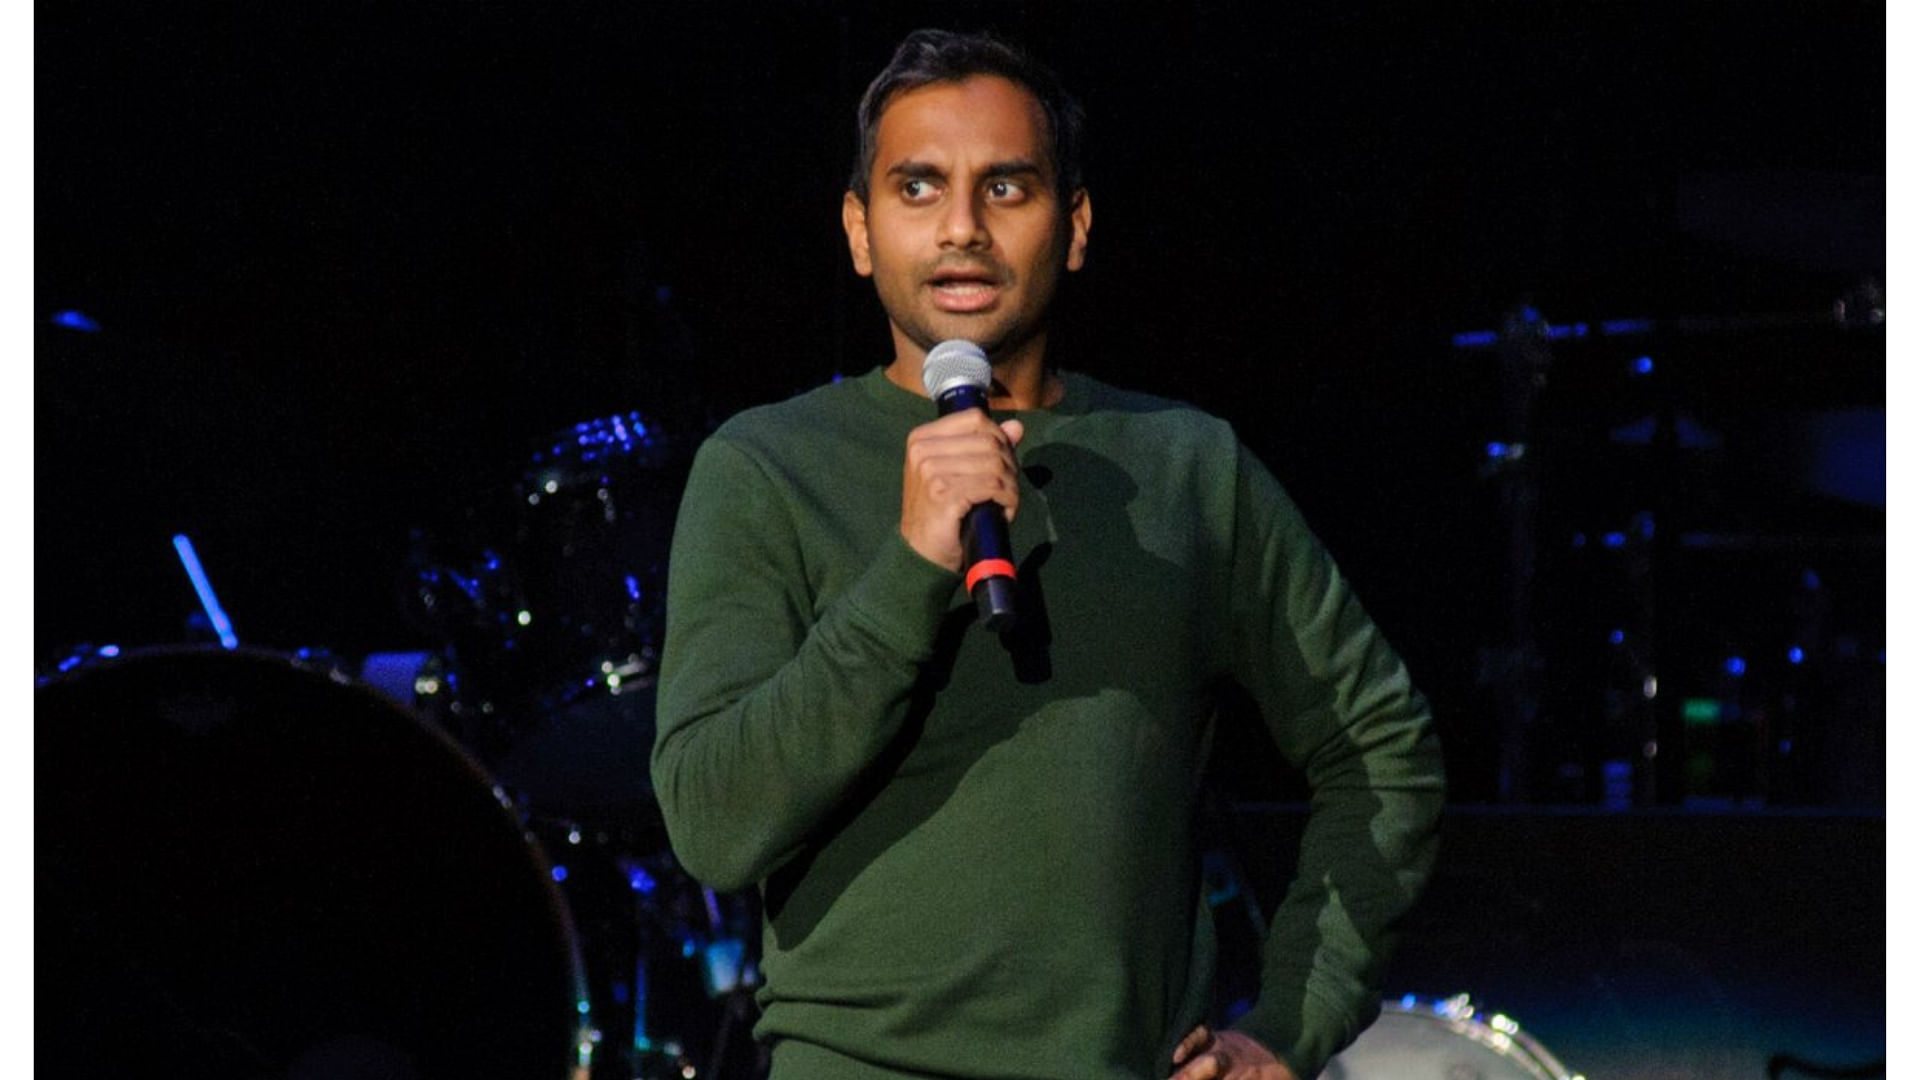 Comedian Aziz Ansari spoke out about sexual assault allegations against him at a show in New York.